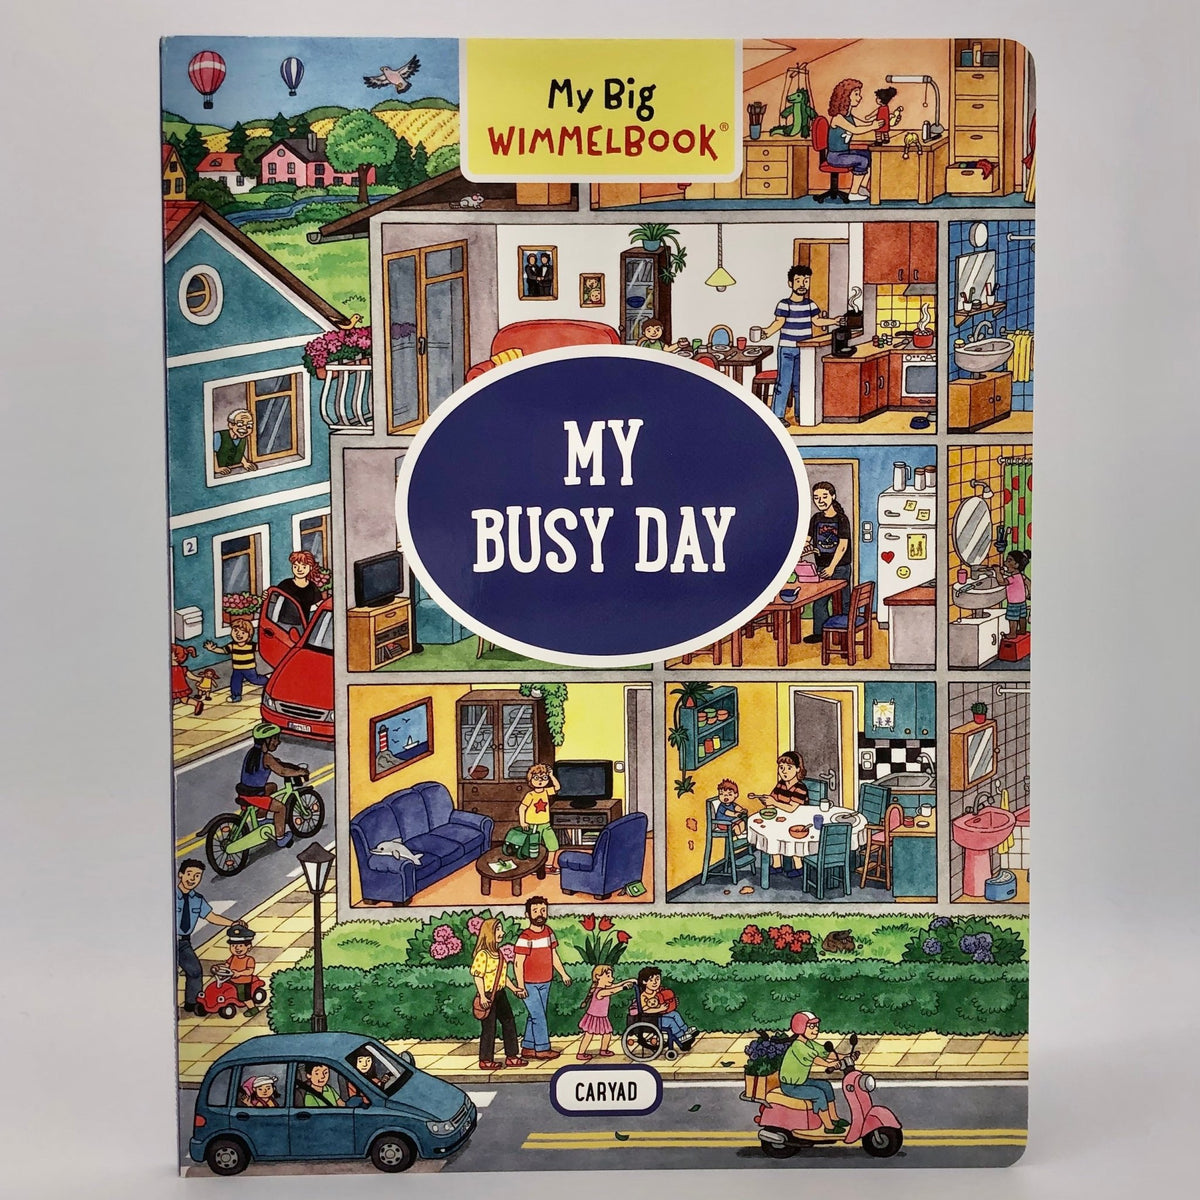 Regal　Big　The　Wimmelbook:　–　Day　Busy　My　The　Find